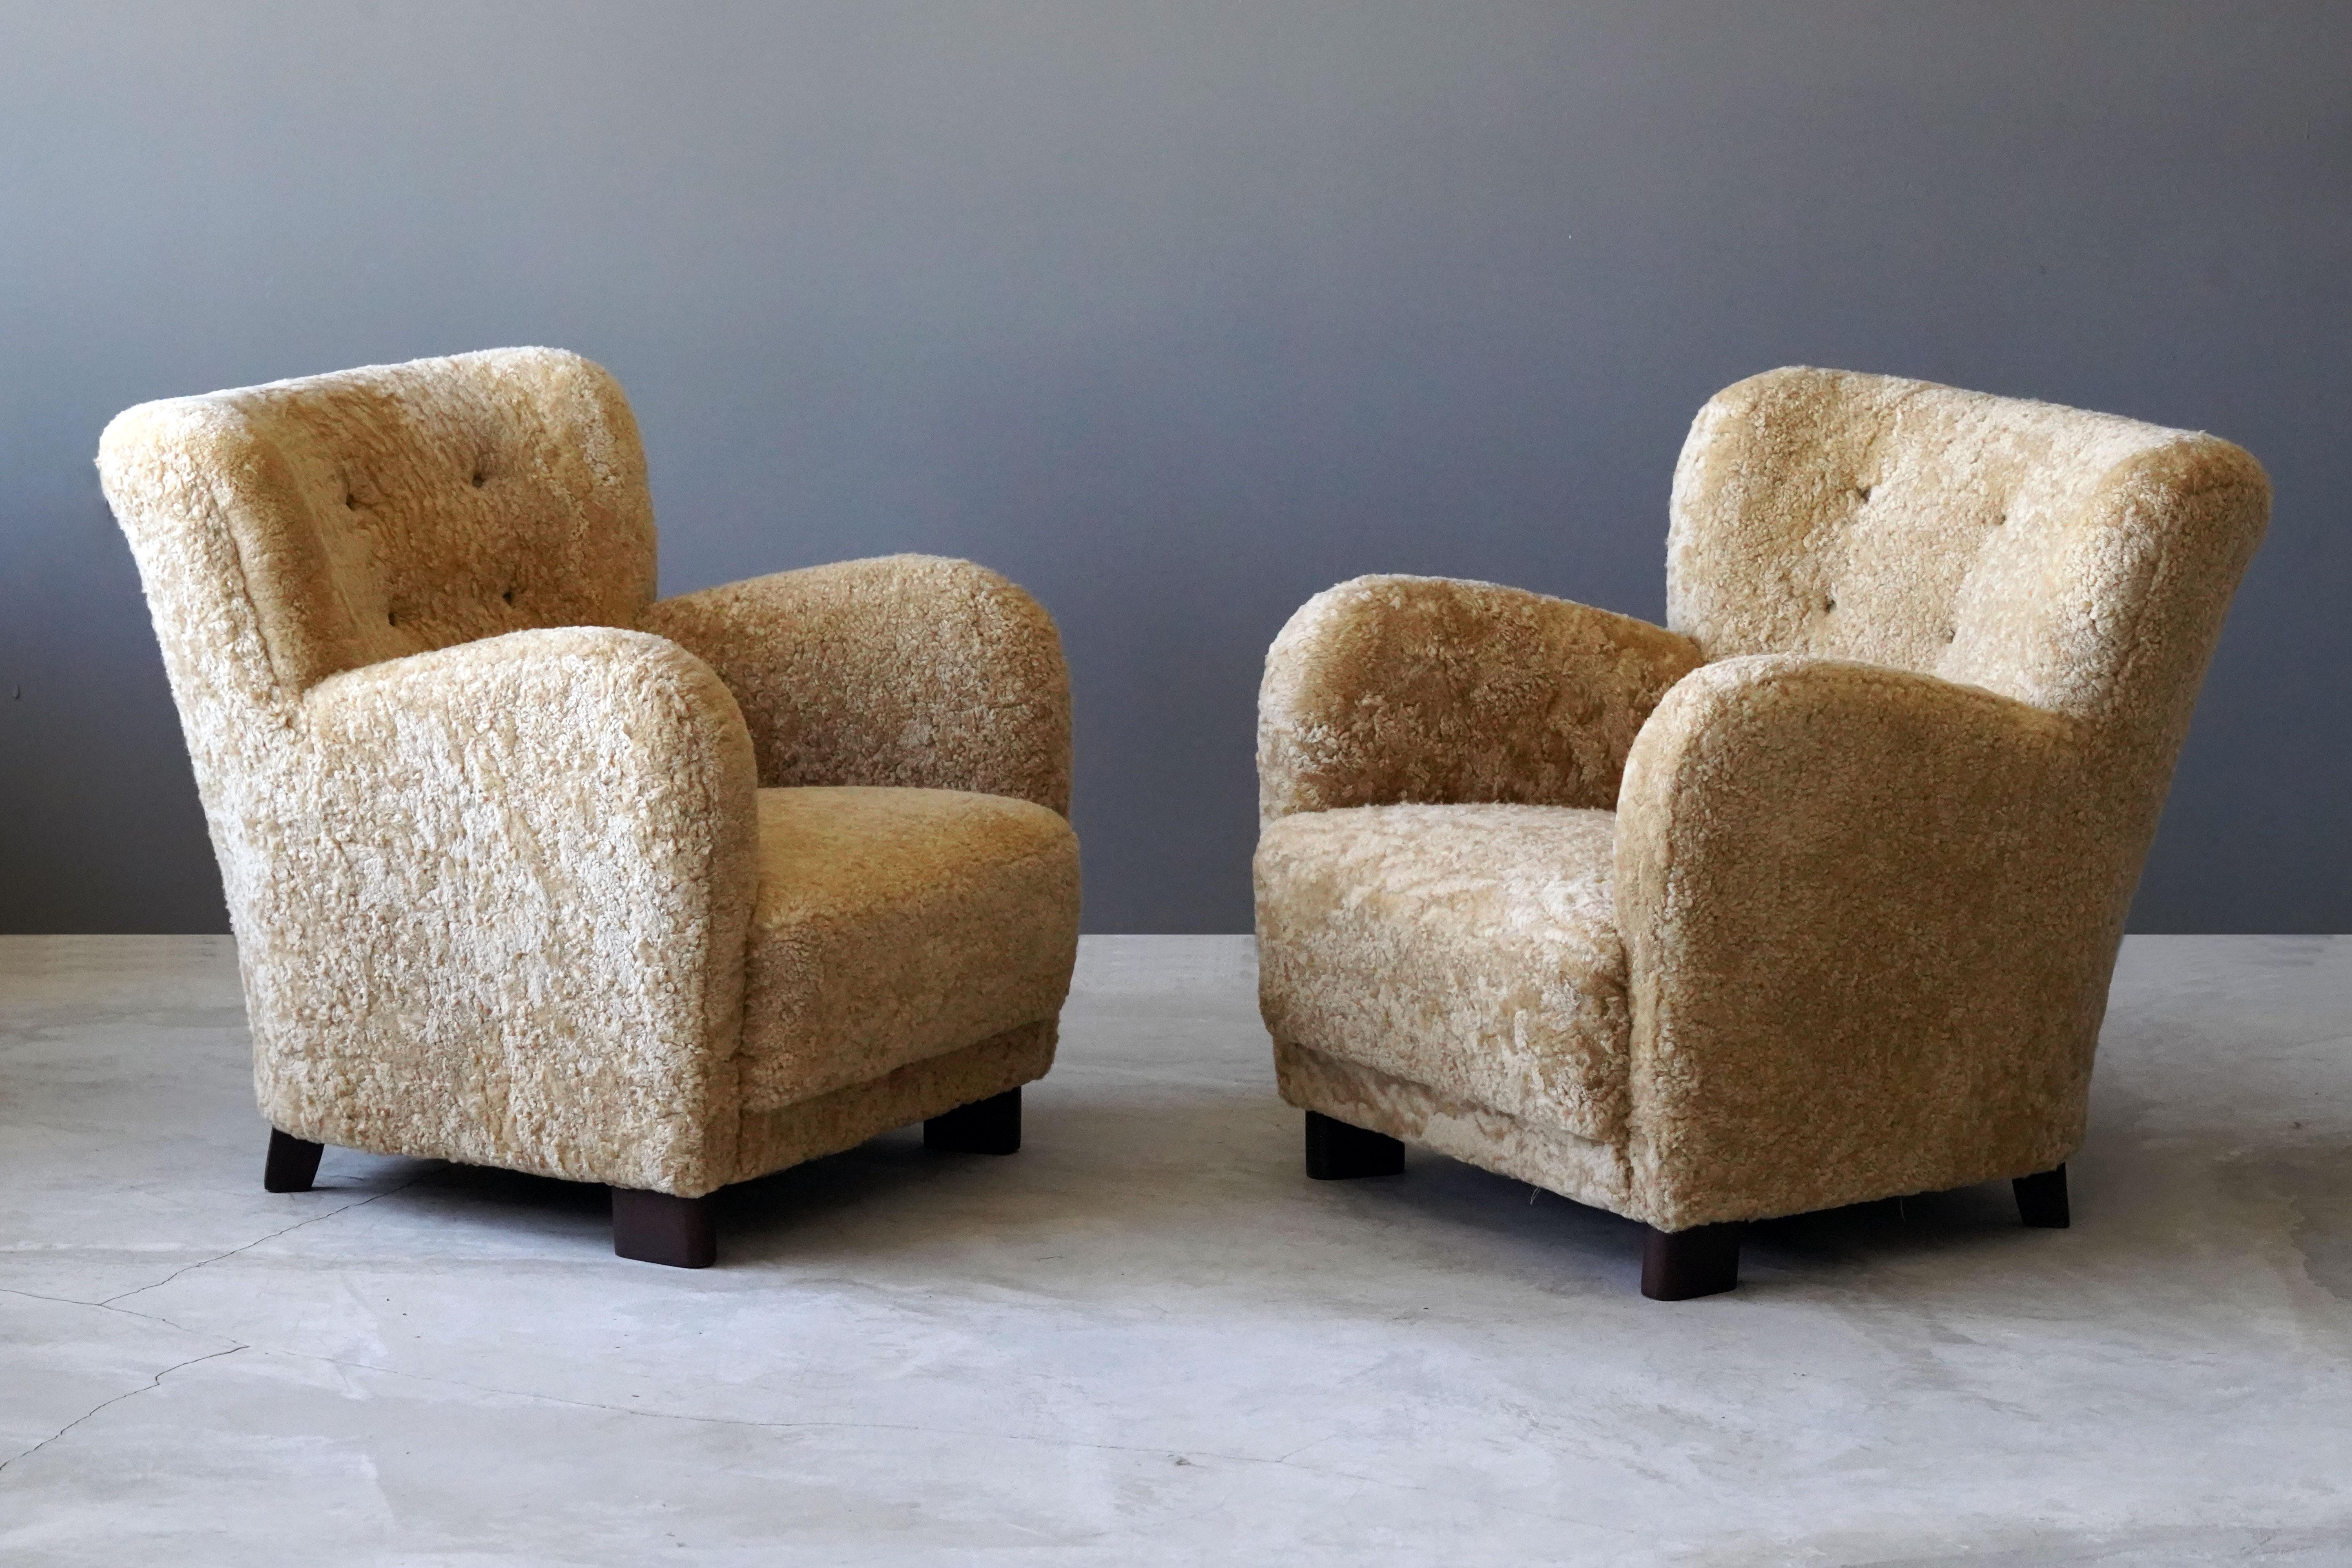 A pair of organic lounge chairs. Reupholstered in brand new sheepskin. Design and production attributed to Fritz Hansen (compare to model 1669 for similar design).

Other designers of the period include Flemming Lassen, Arnold Madsen, Philip